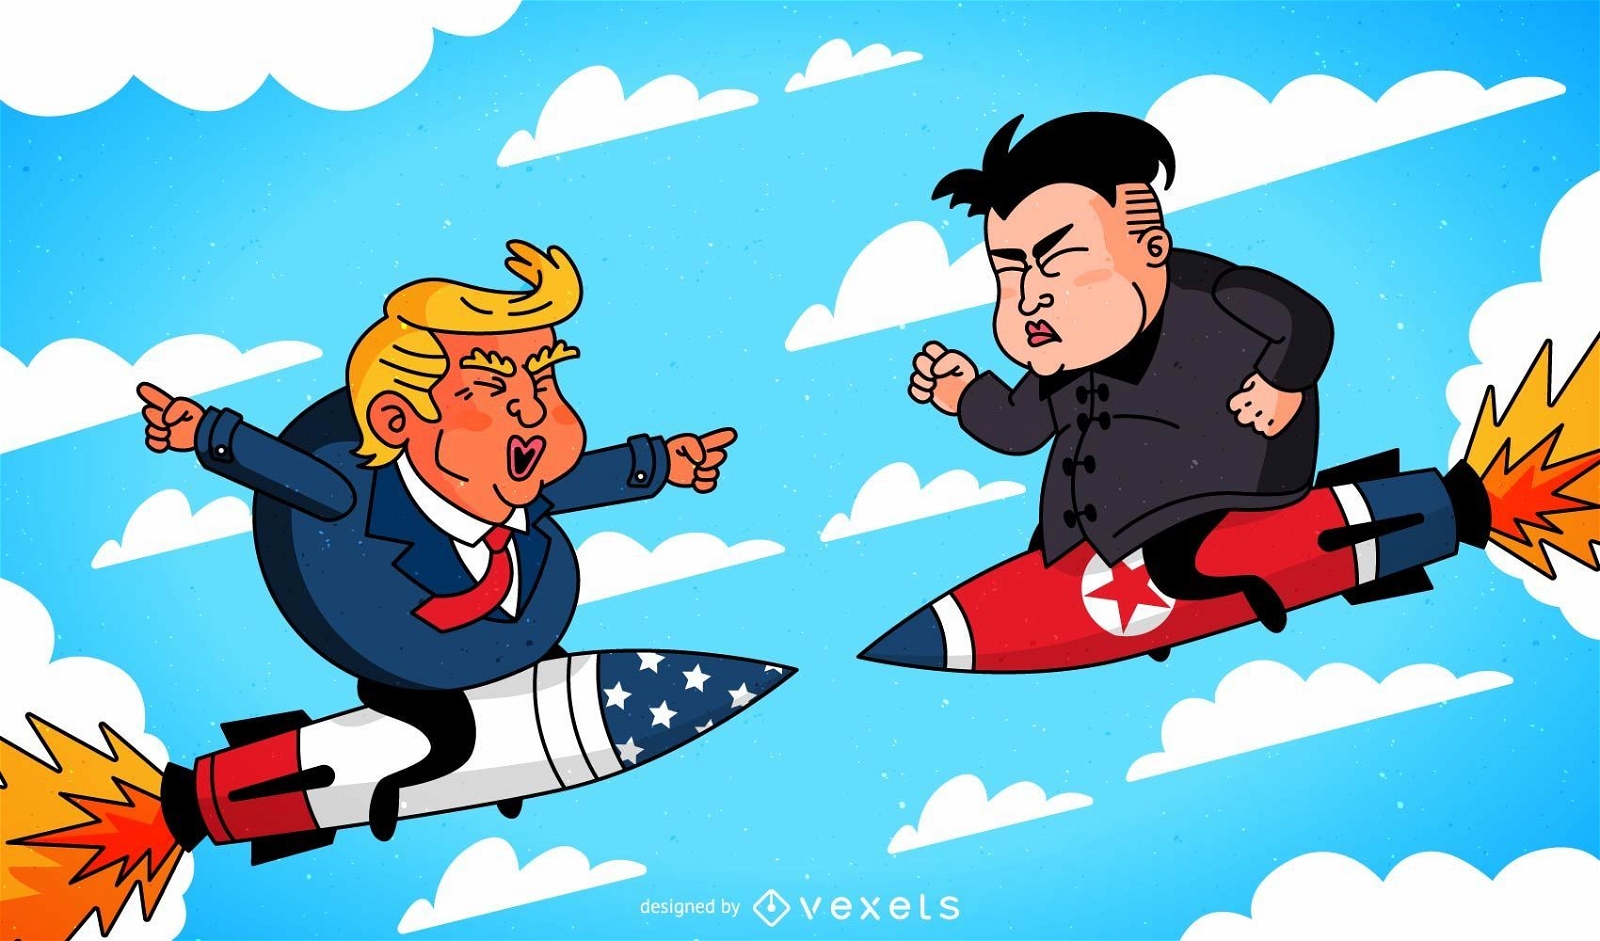 Donald Trump and Kim Jong-un cartoon on missiles against each other